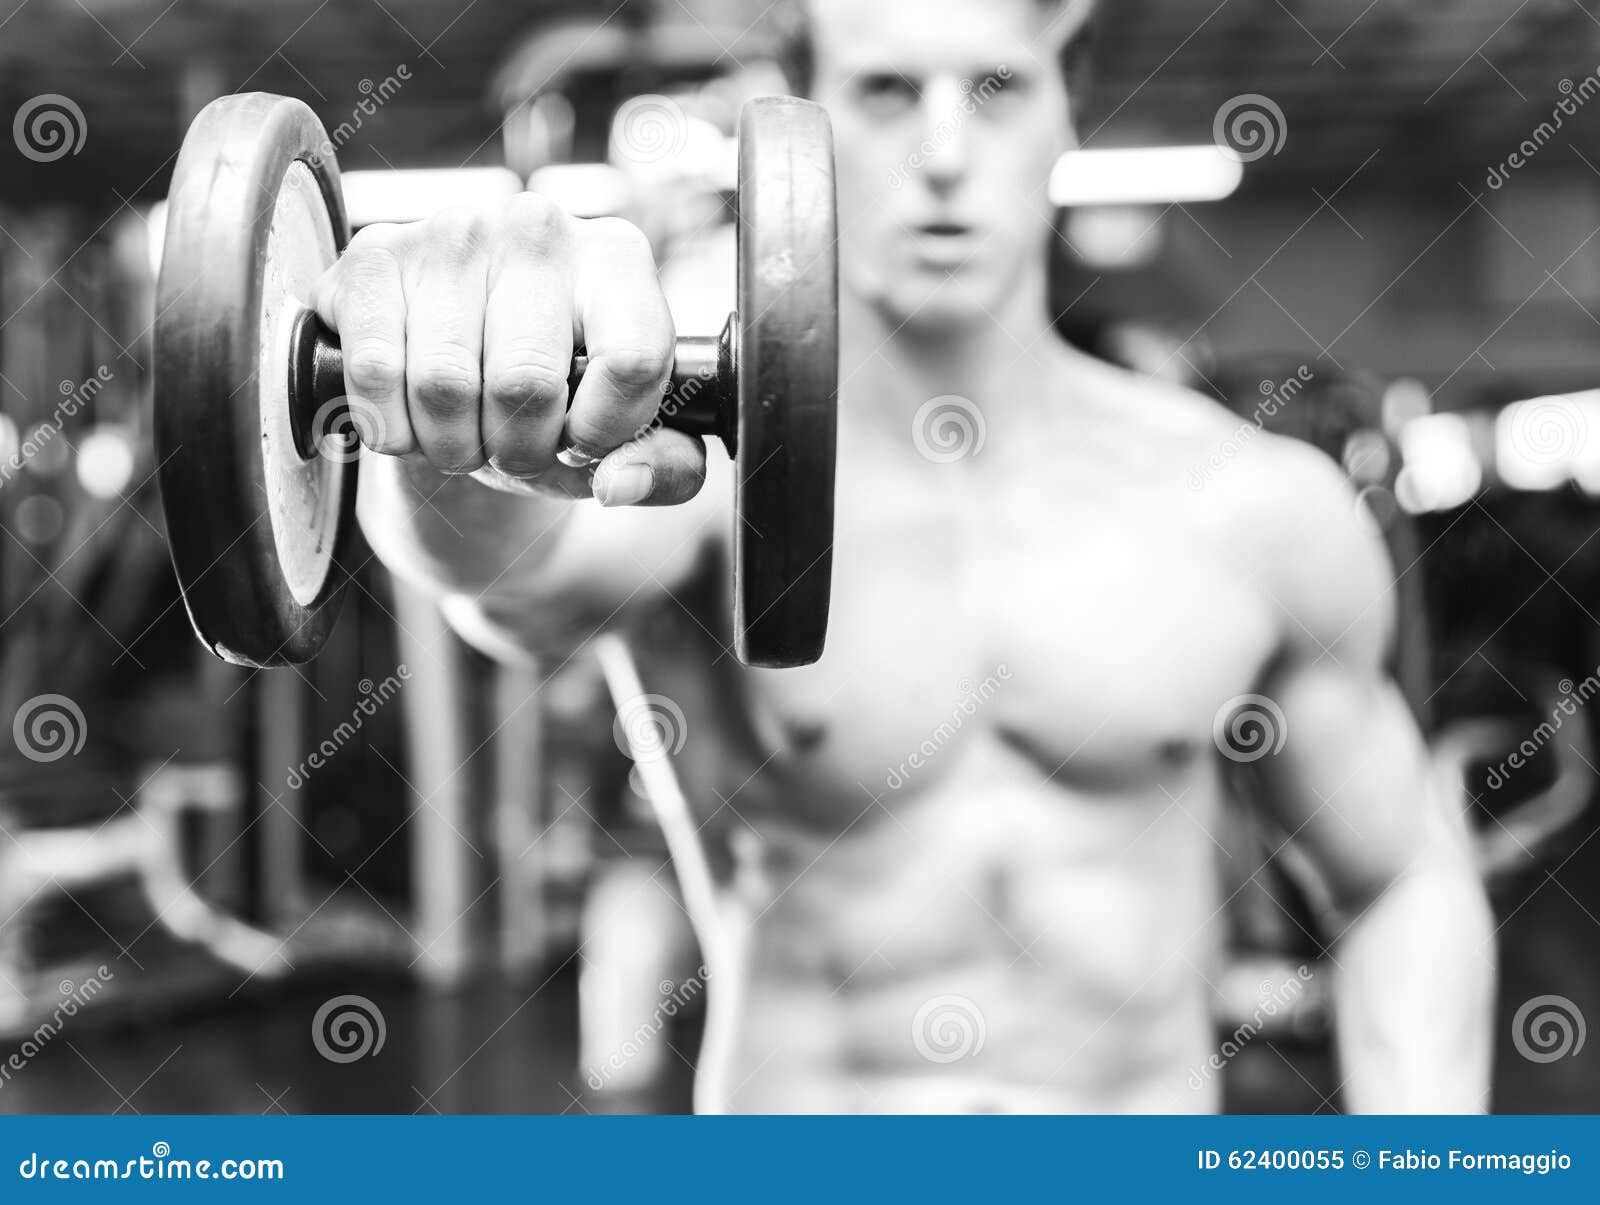 Black and White Concept about Gym Stock Image - Image of handsome, hand ...